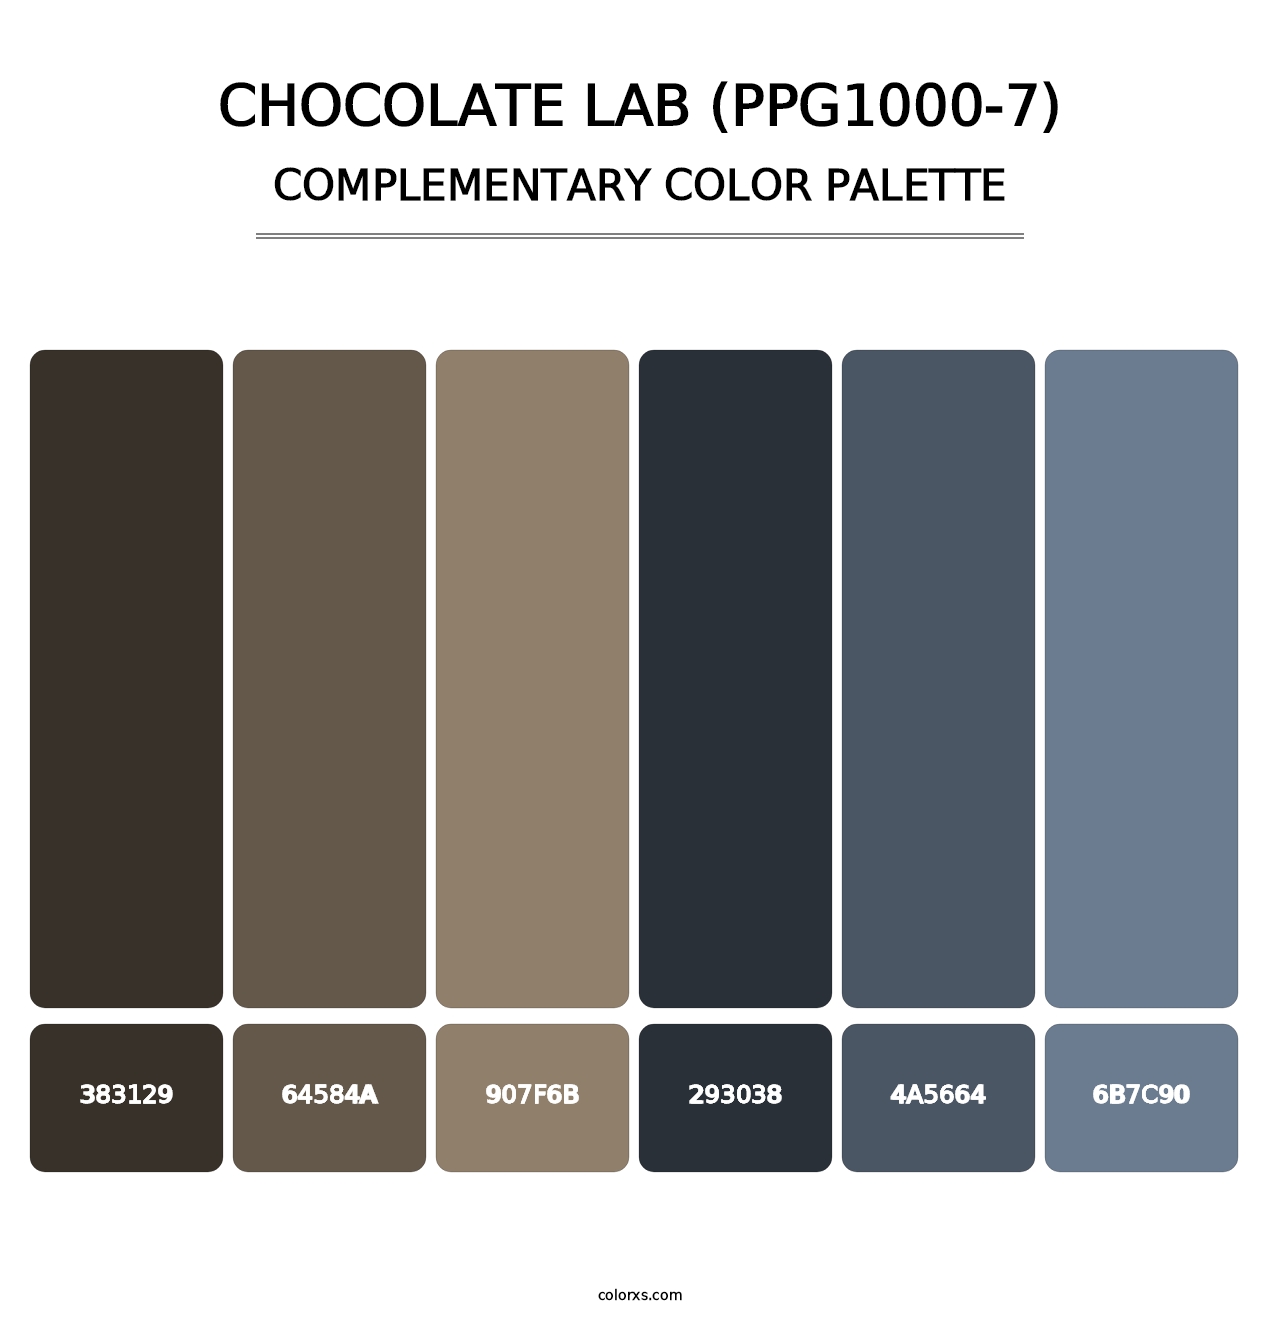 Chocolate Lab (PPG1000-7) - Complementary Color Palette